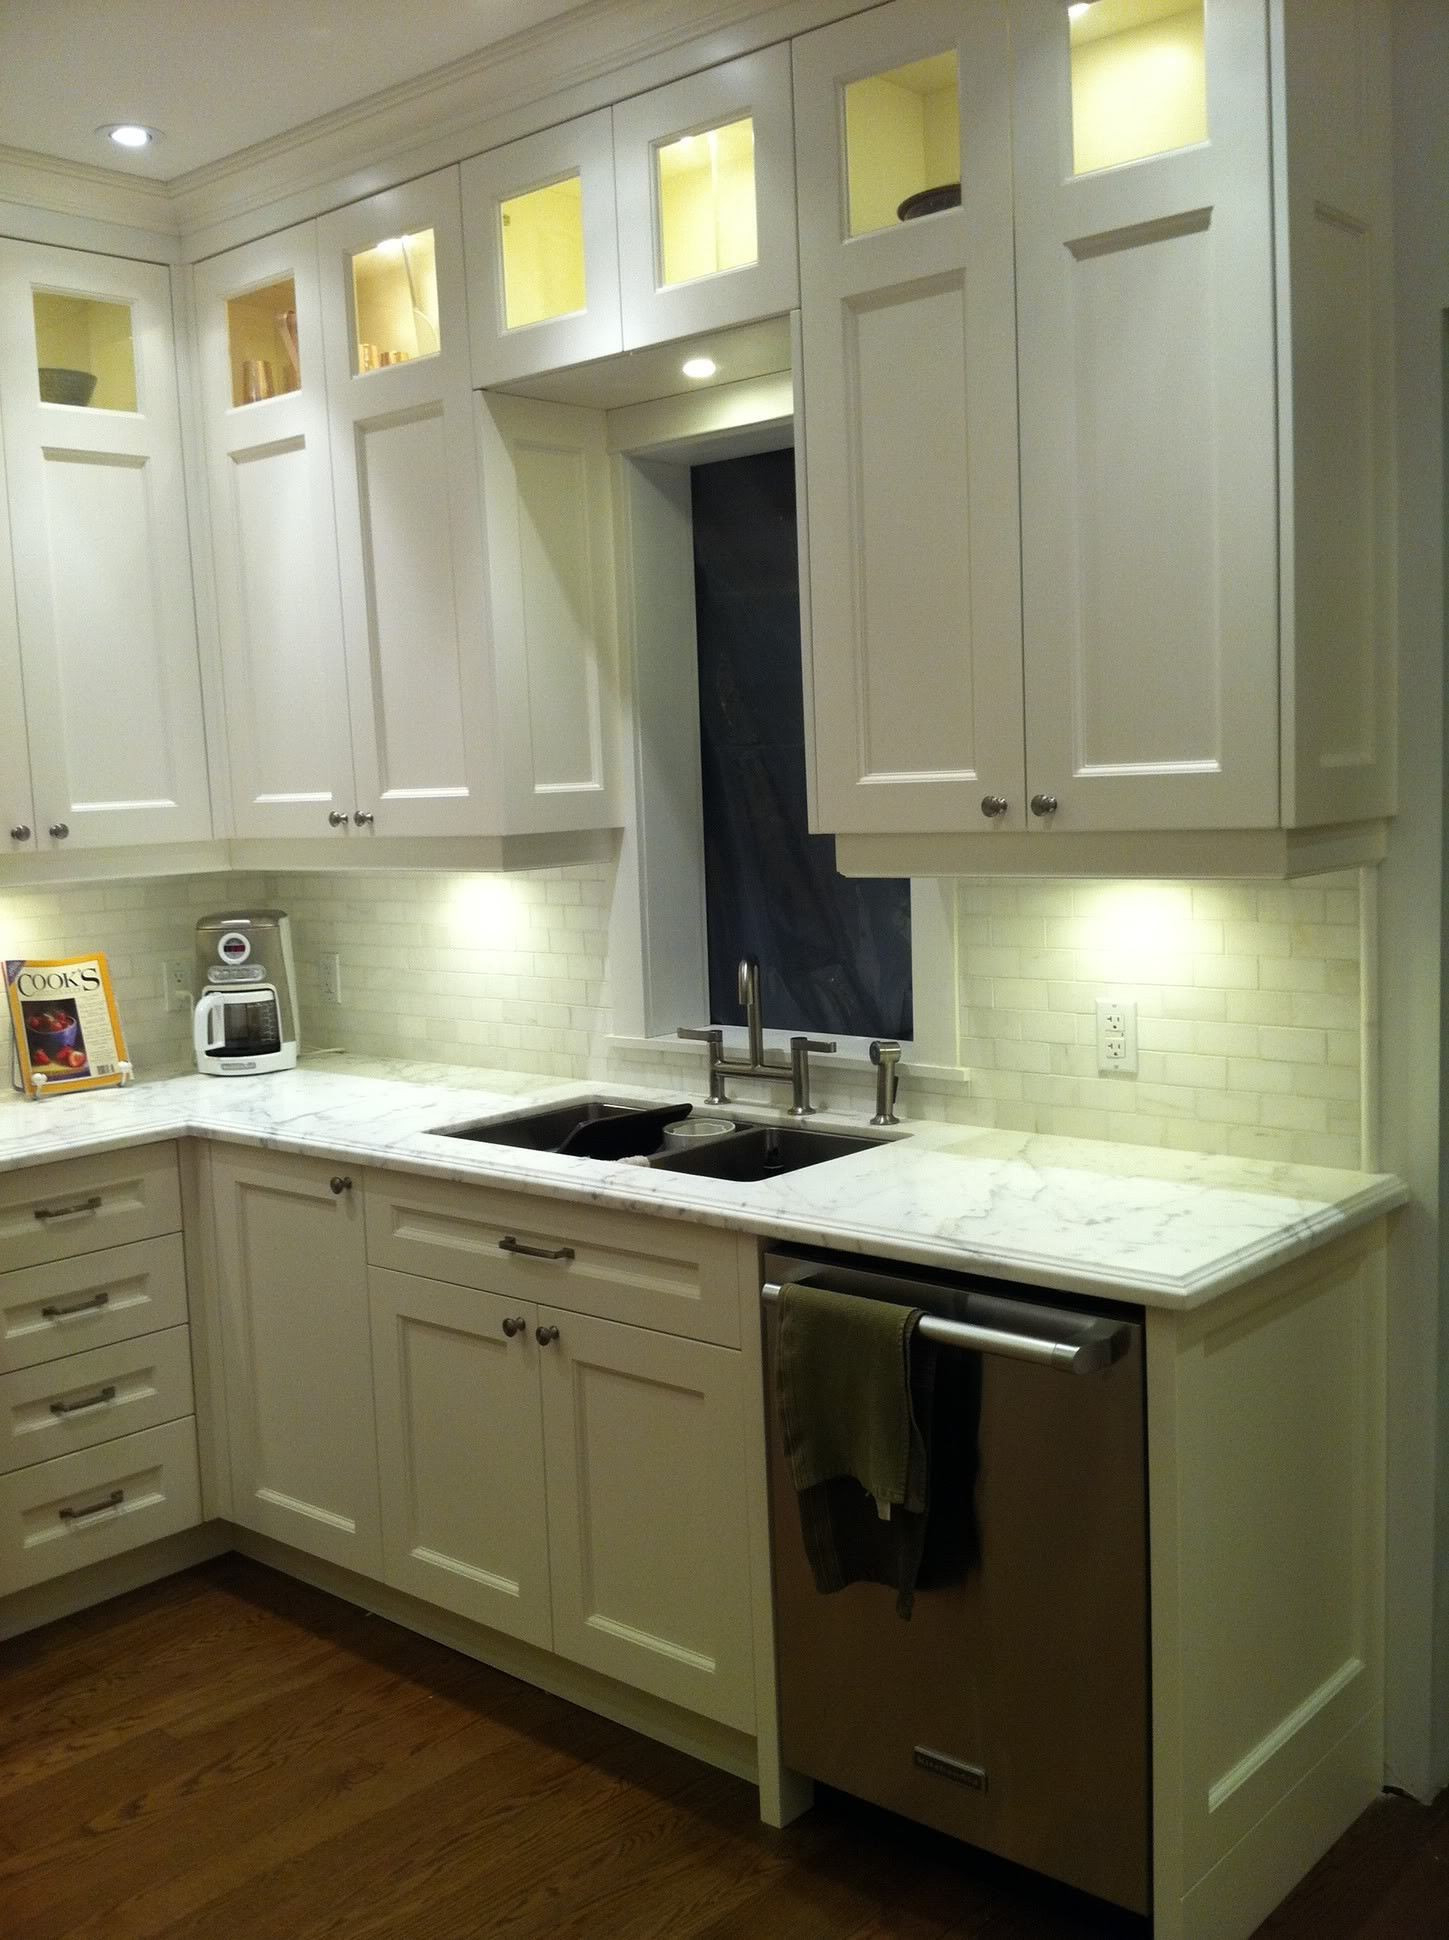 42 Inch Tall Kitchen Cabinets
 9 Inch Kitchen Cabinets